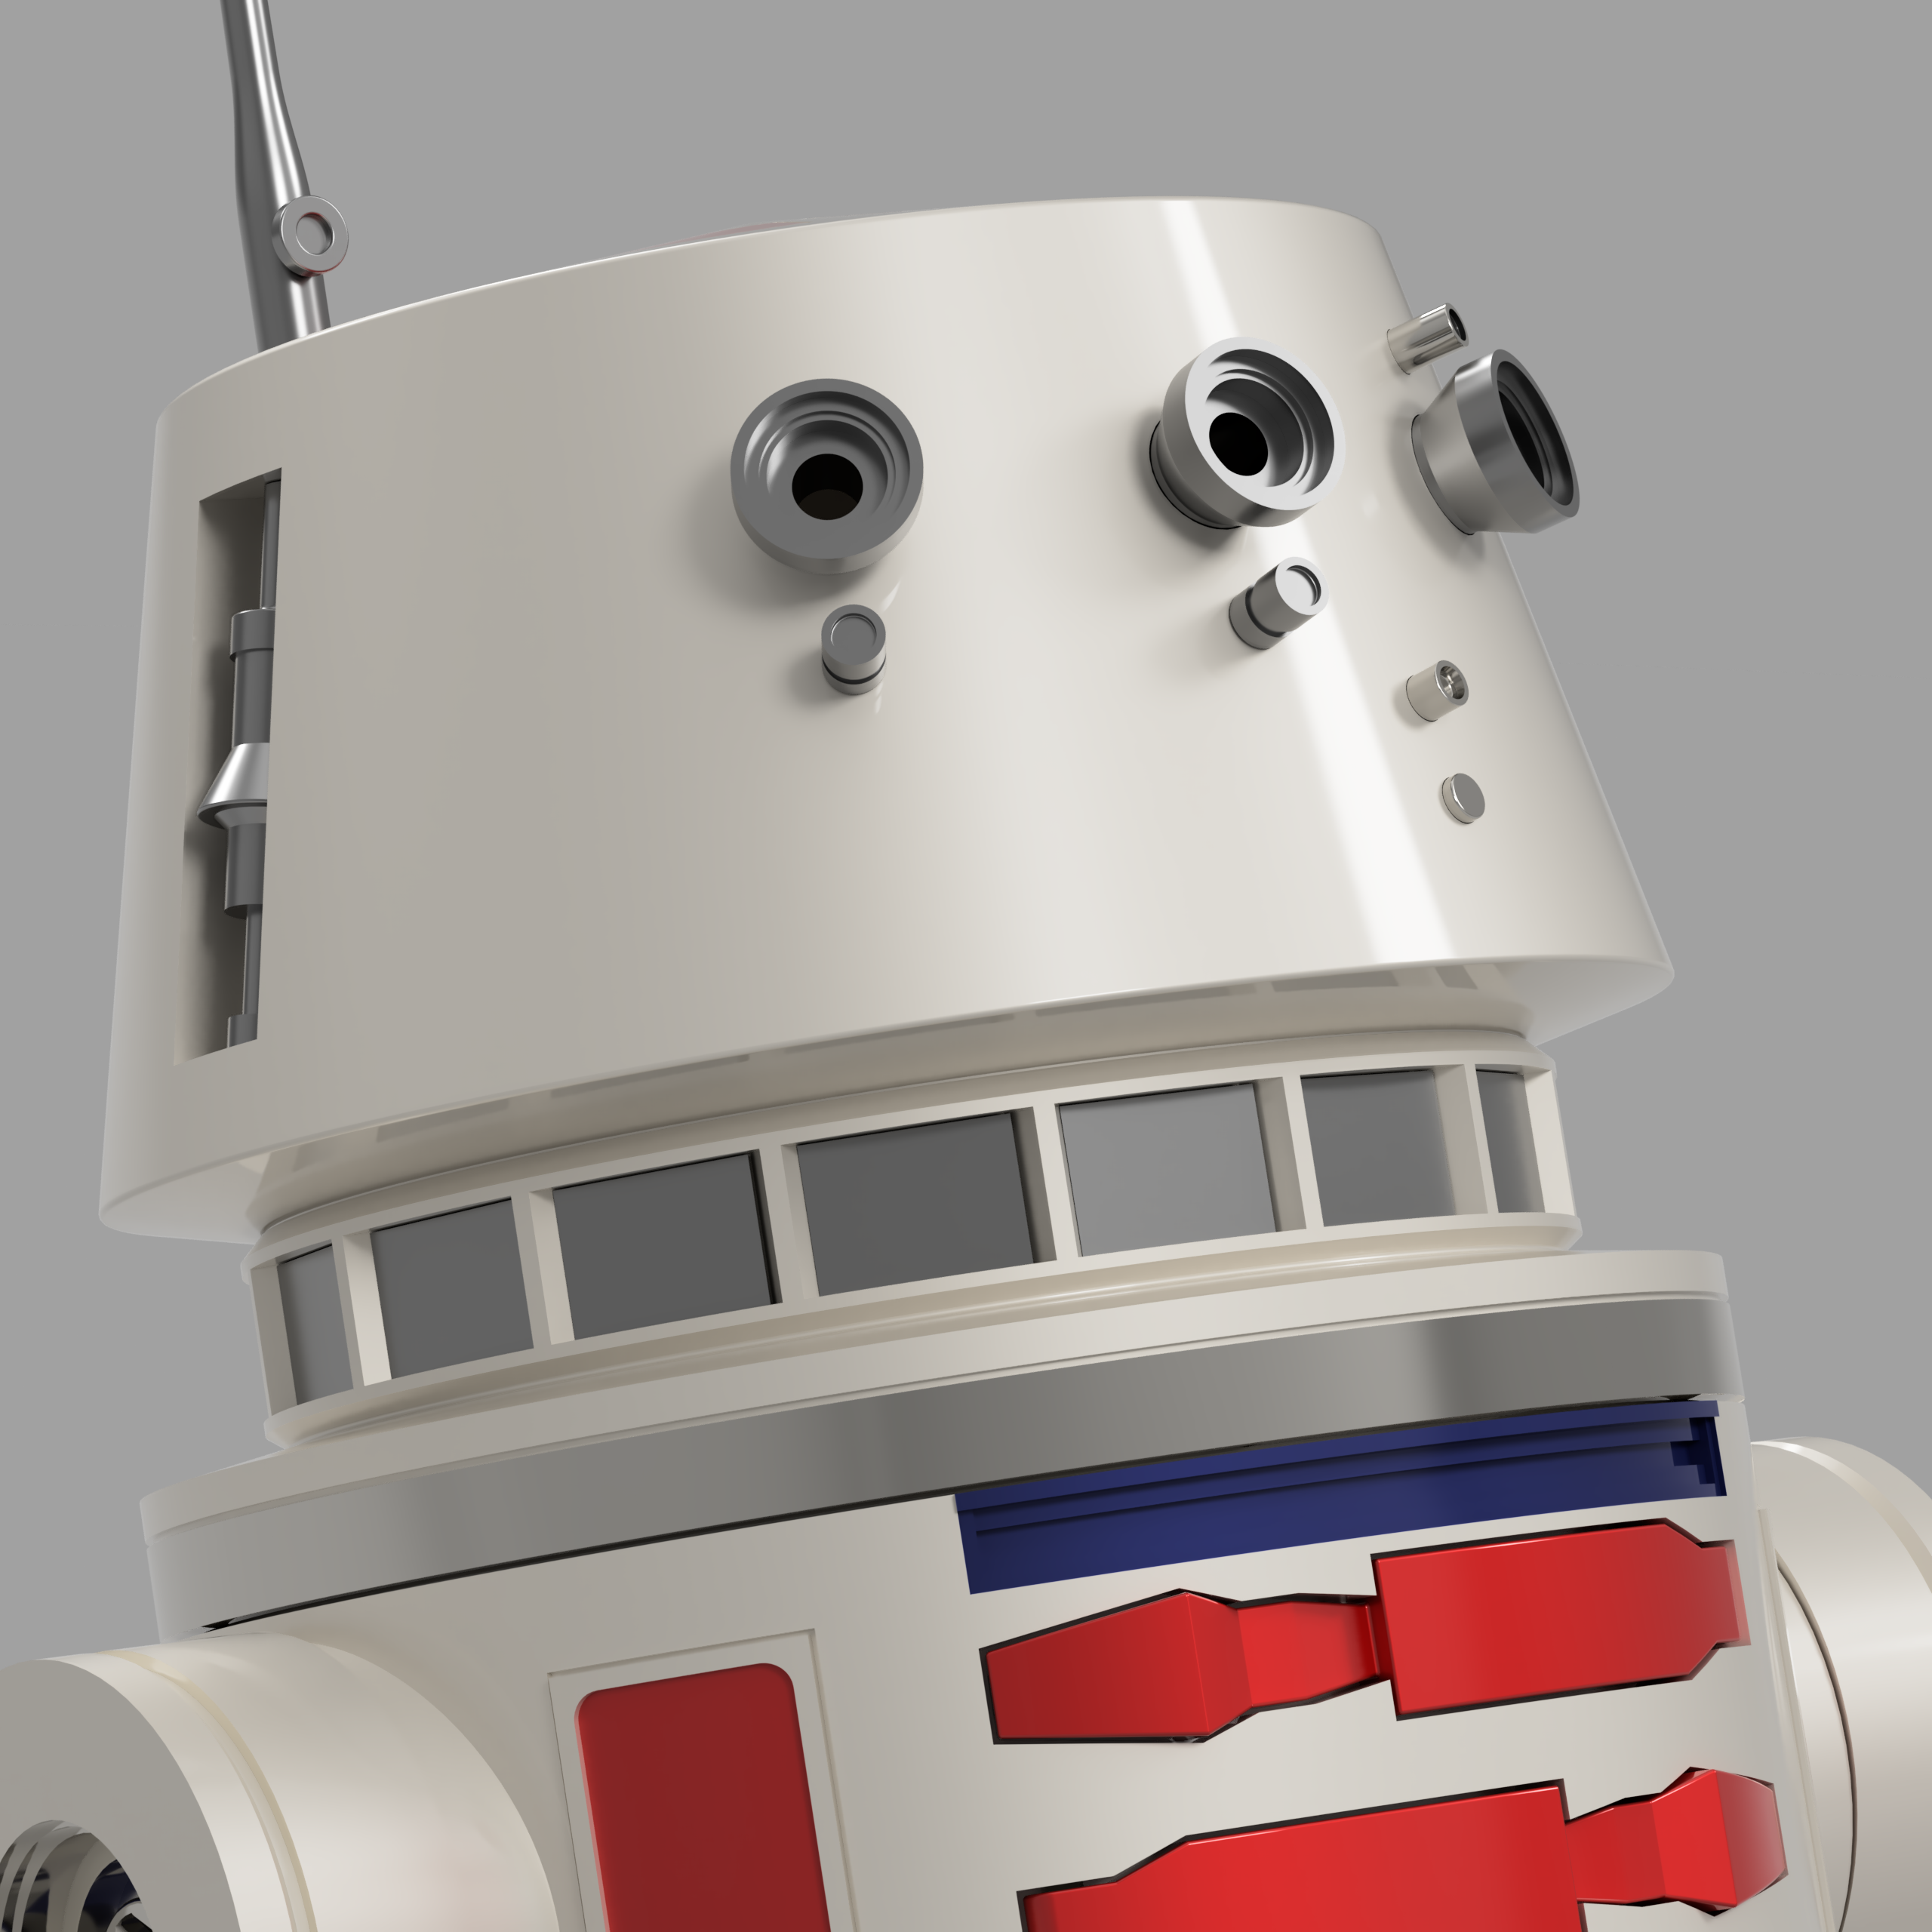 R2D2_2022-Feb-07_06-48-35PM-000_CustomizedView14473822050.png